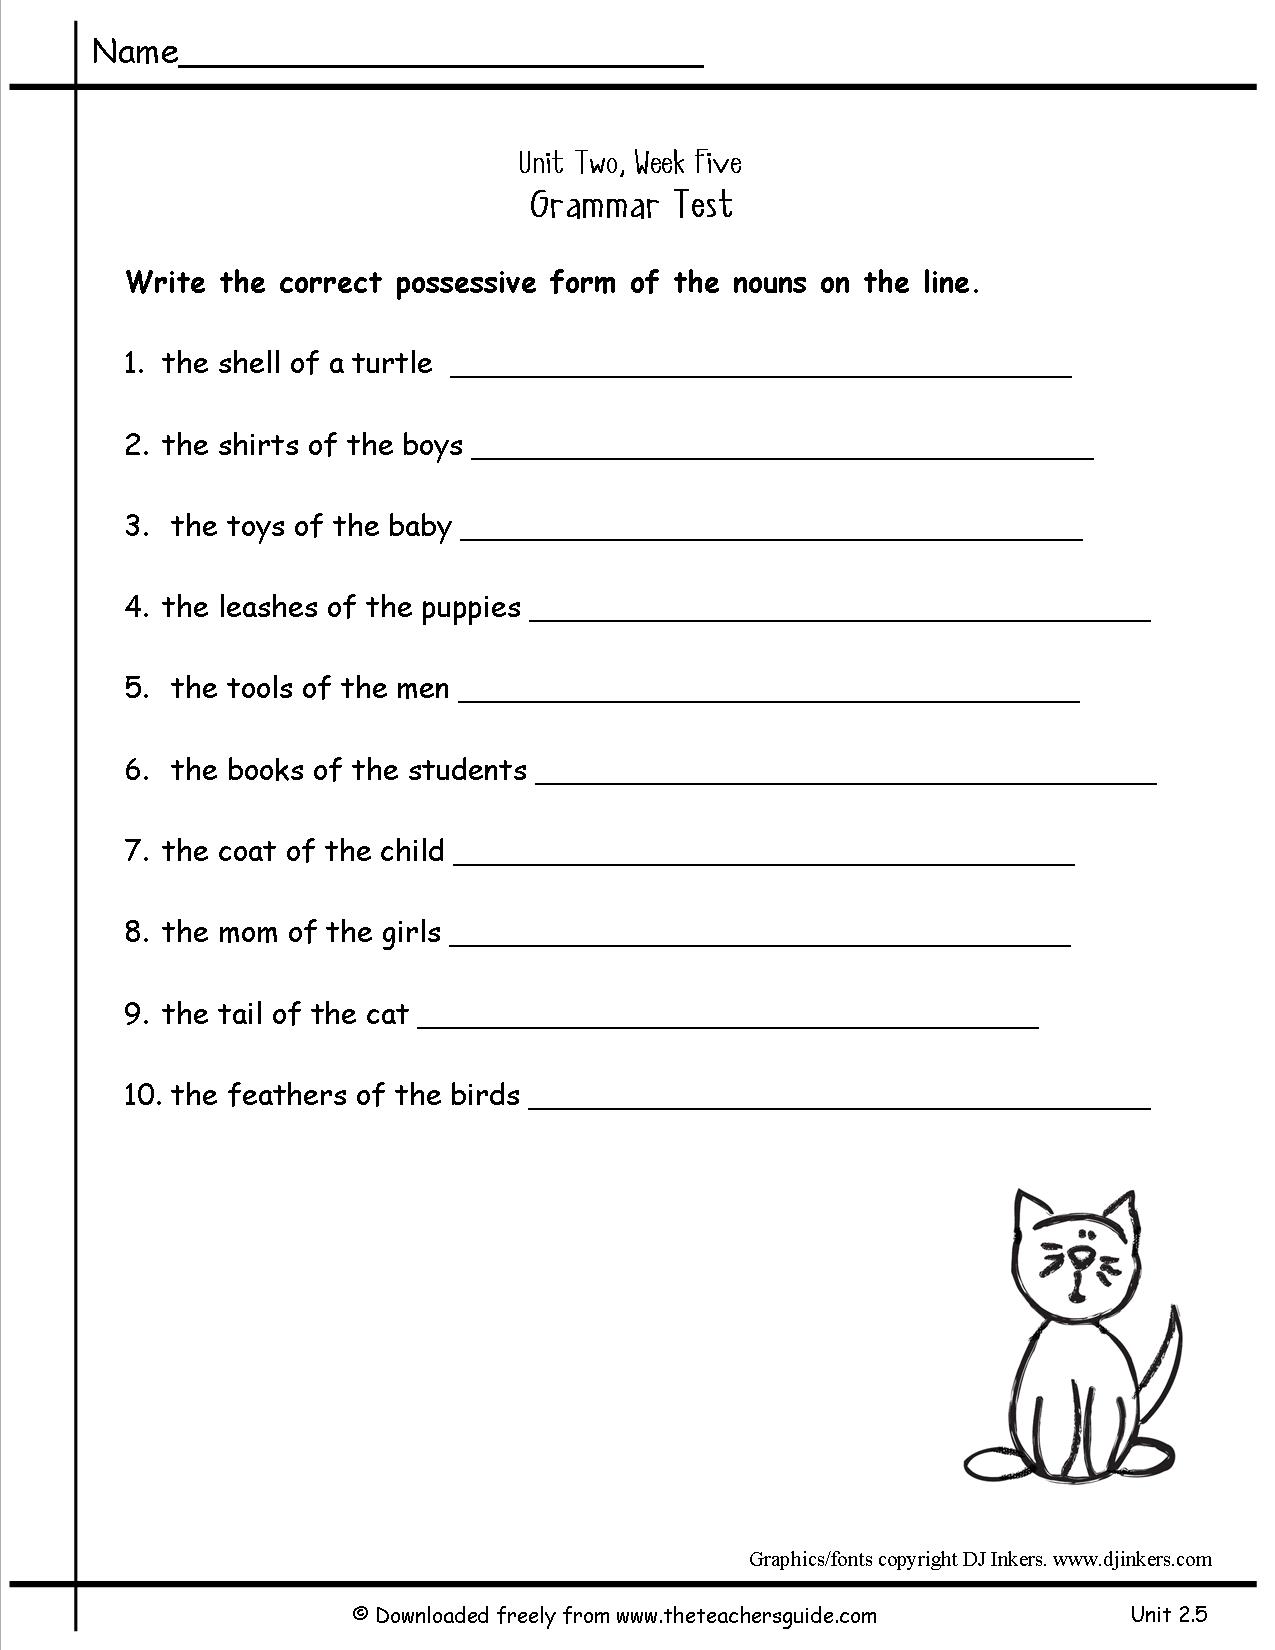 18 Best Images of English Composition Worksheets - First ...